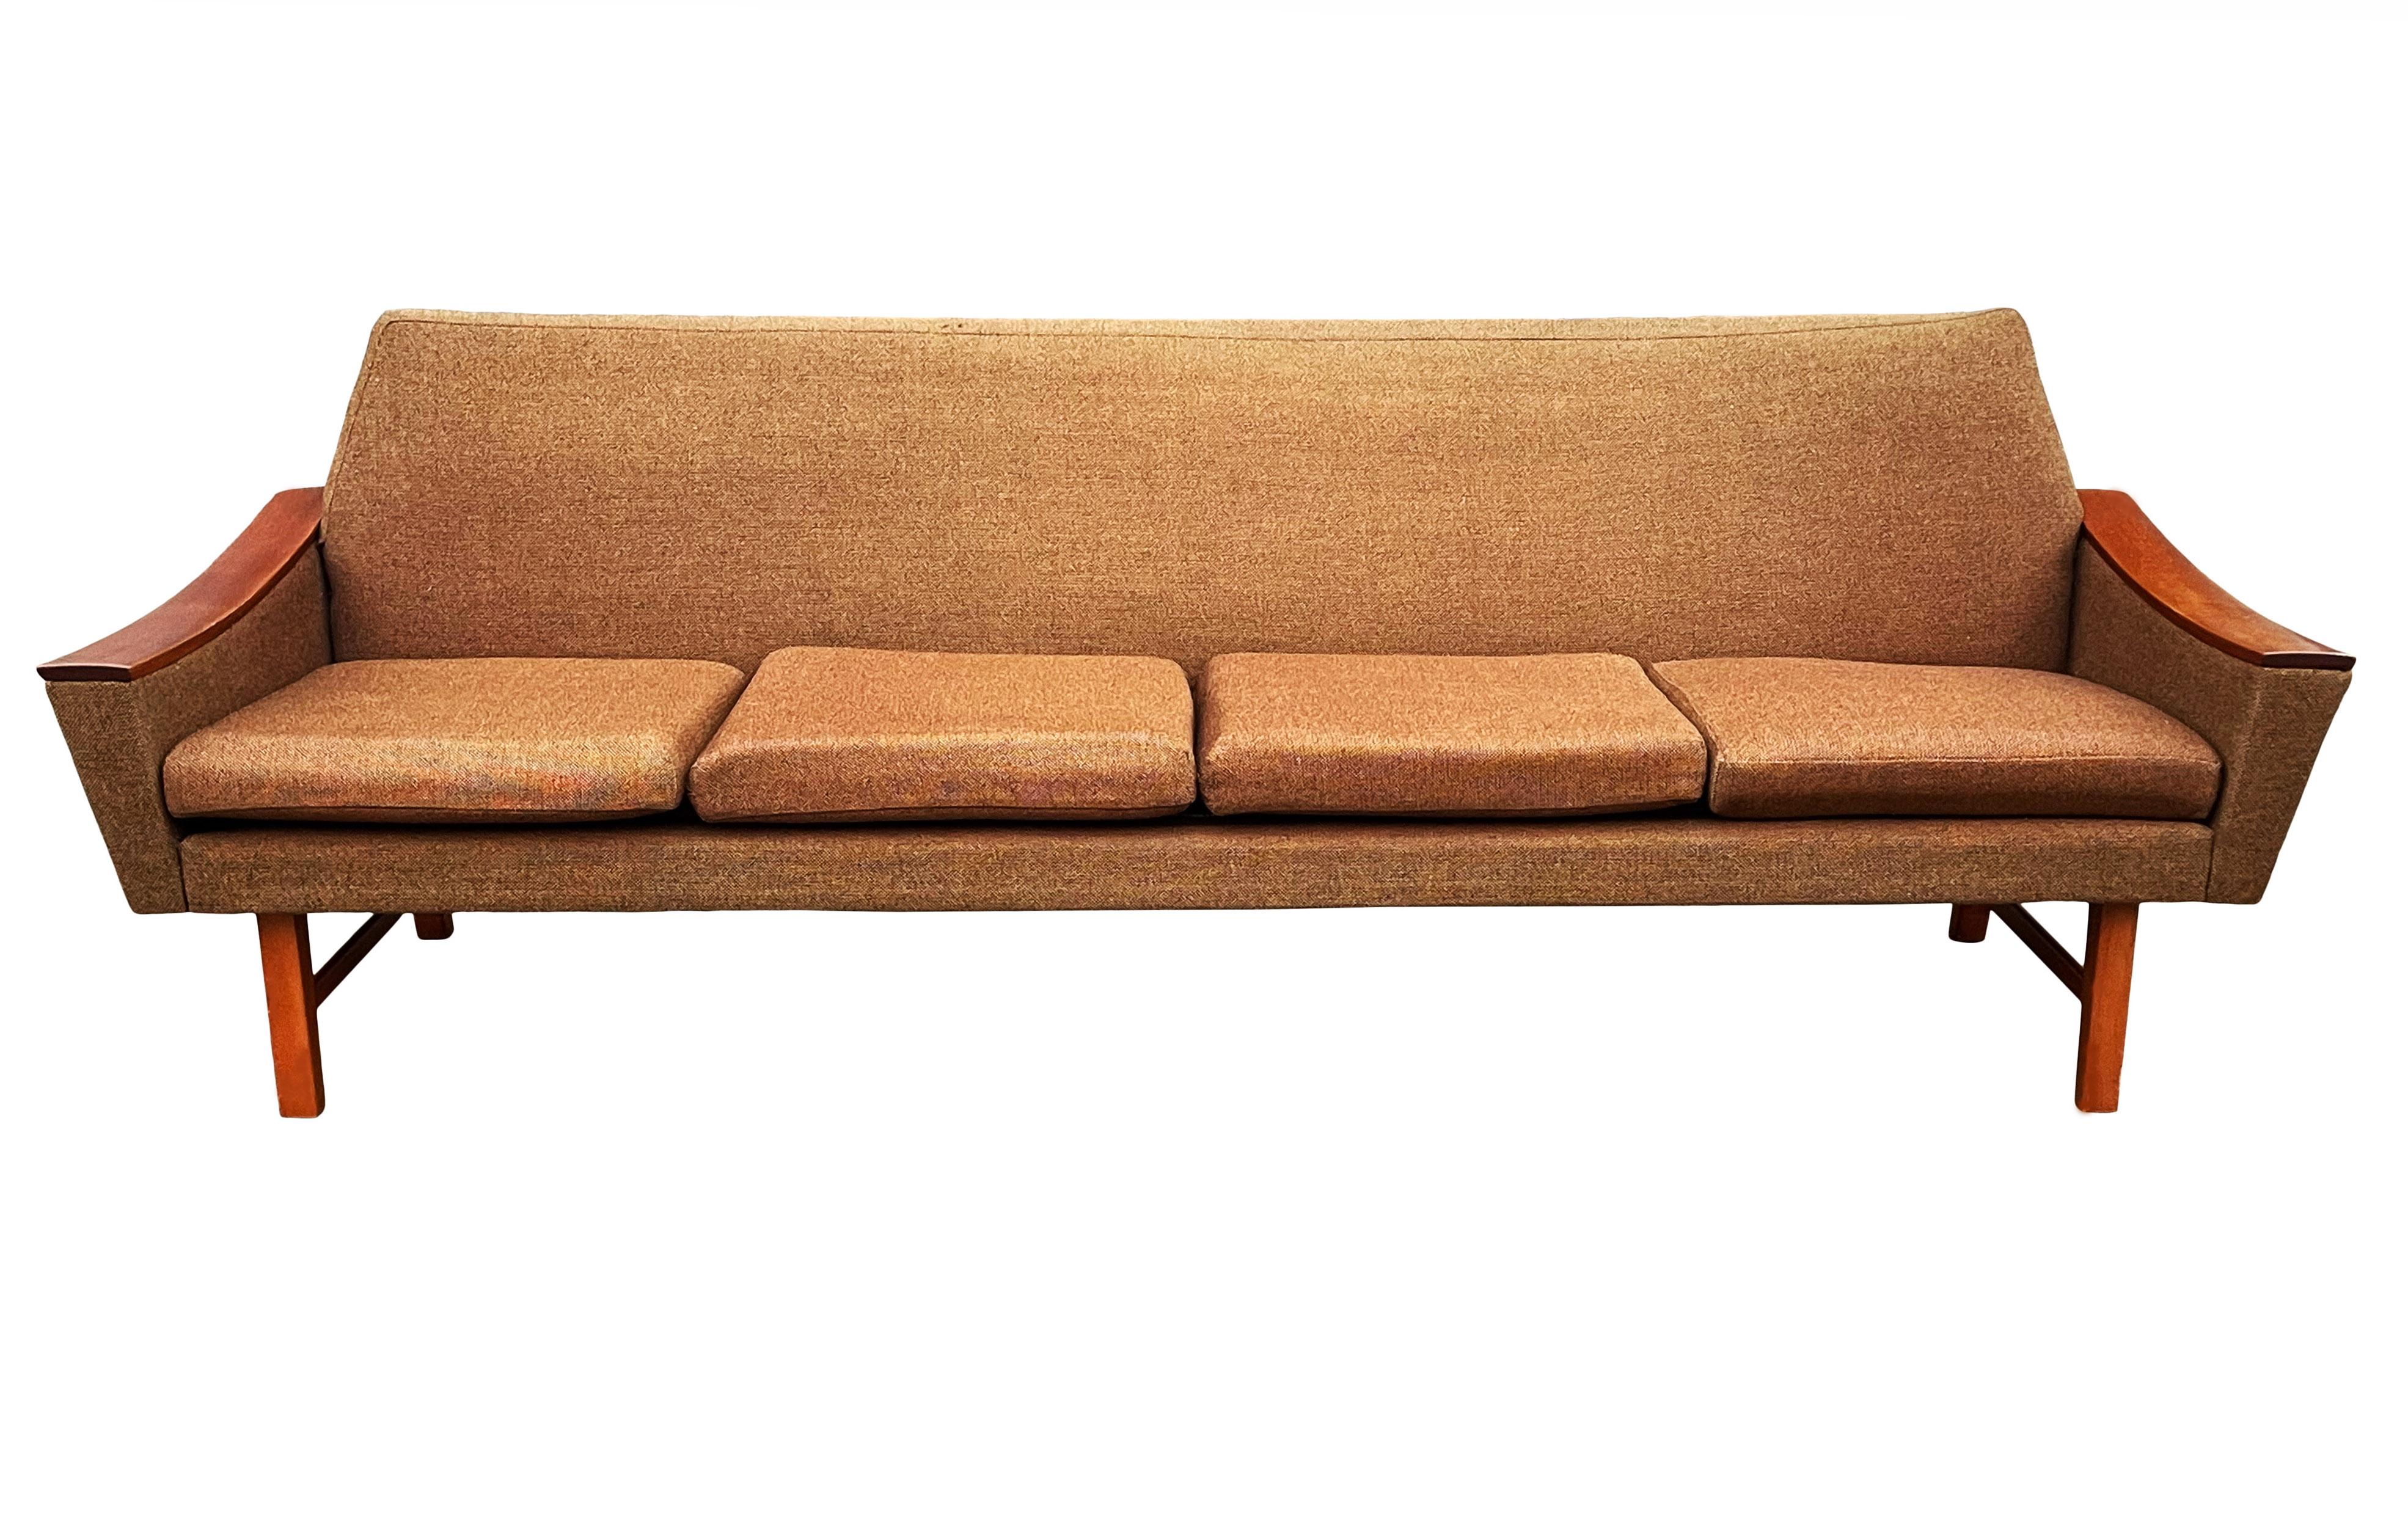 Mid-20th Century Midcentury Danish Modern Sofa in Teak by Oscar Langlo for Pi Langlos Fabrikker